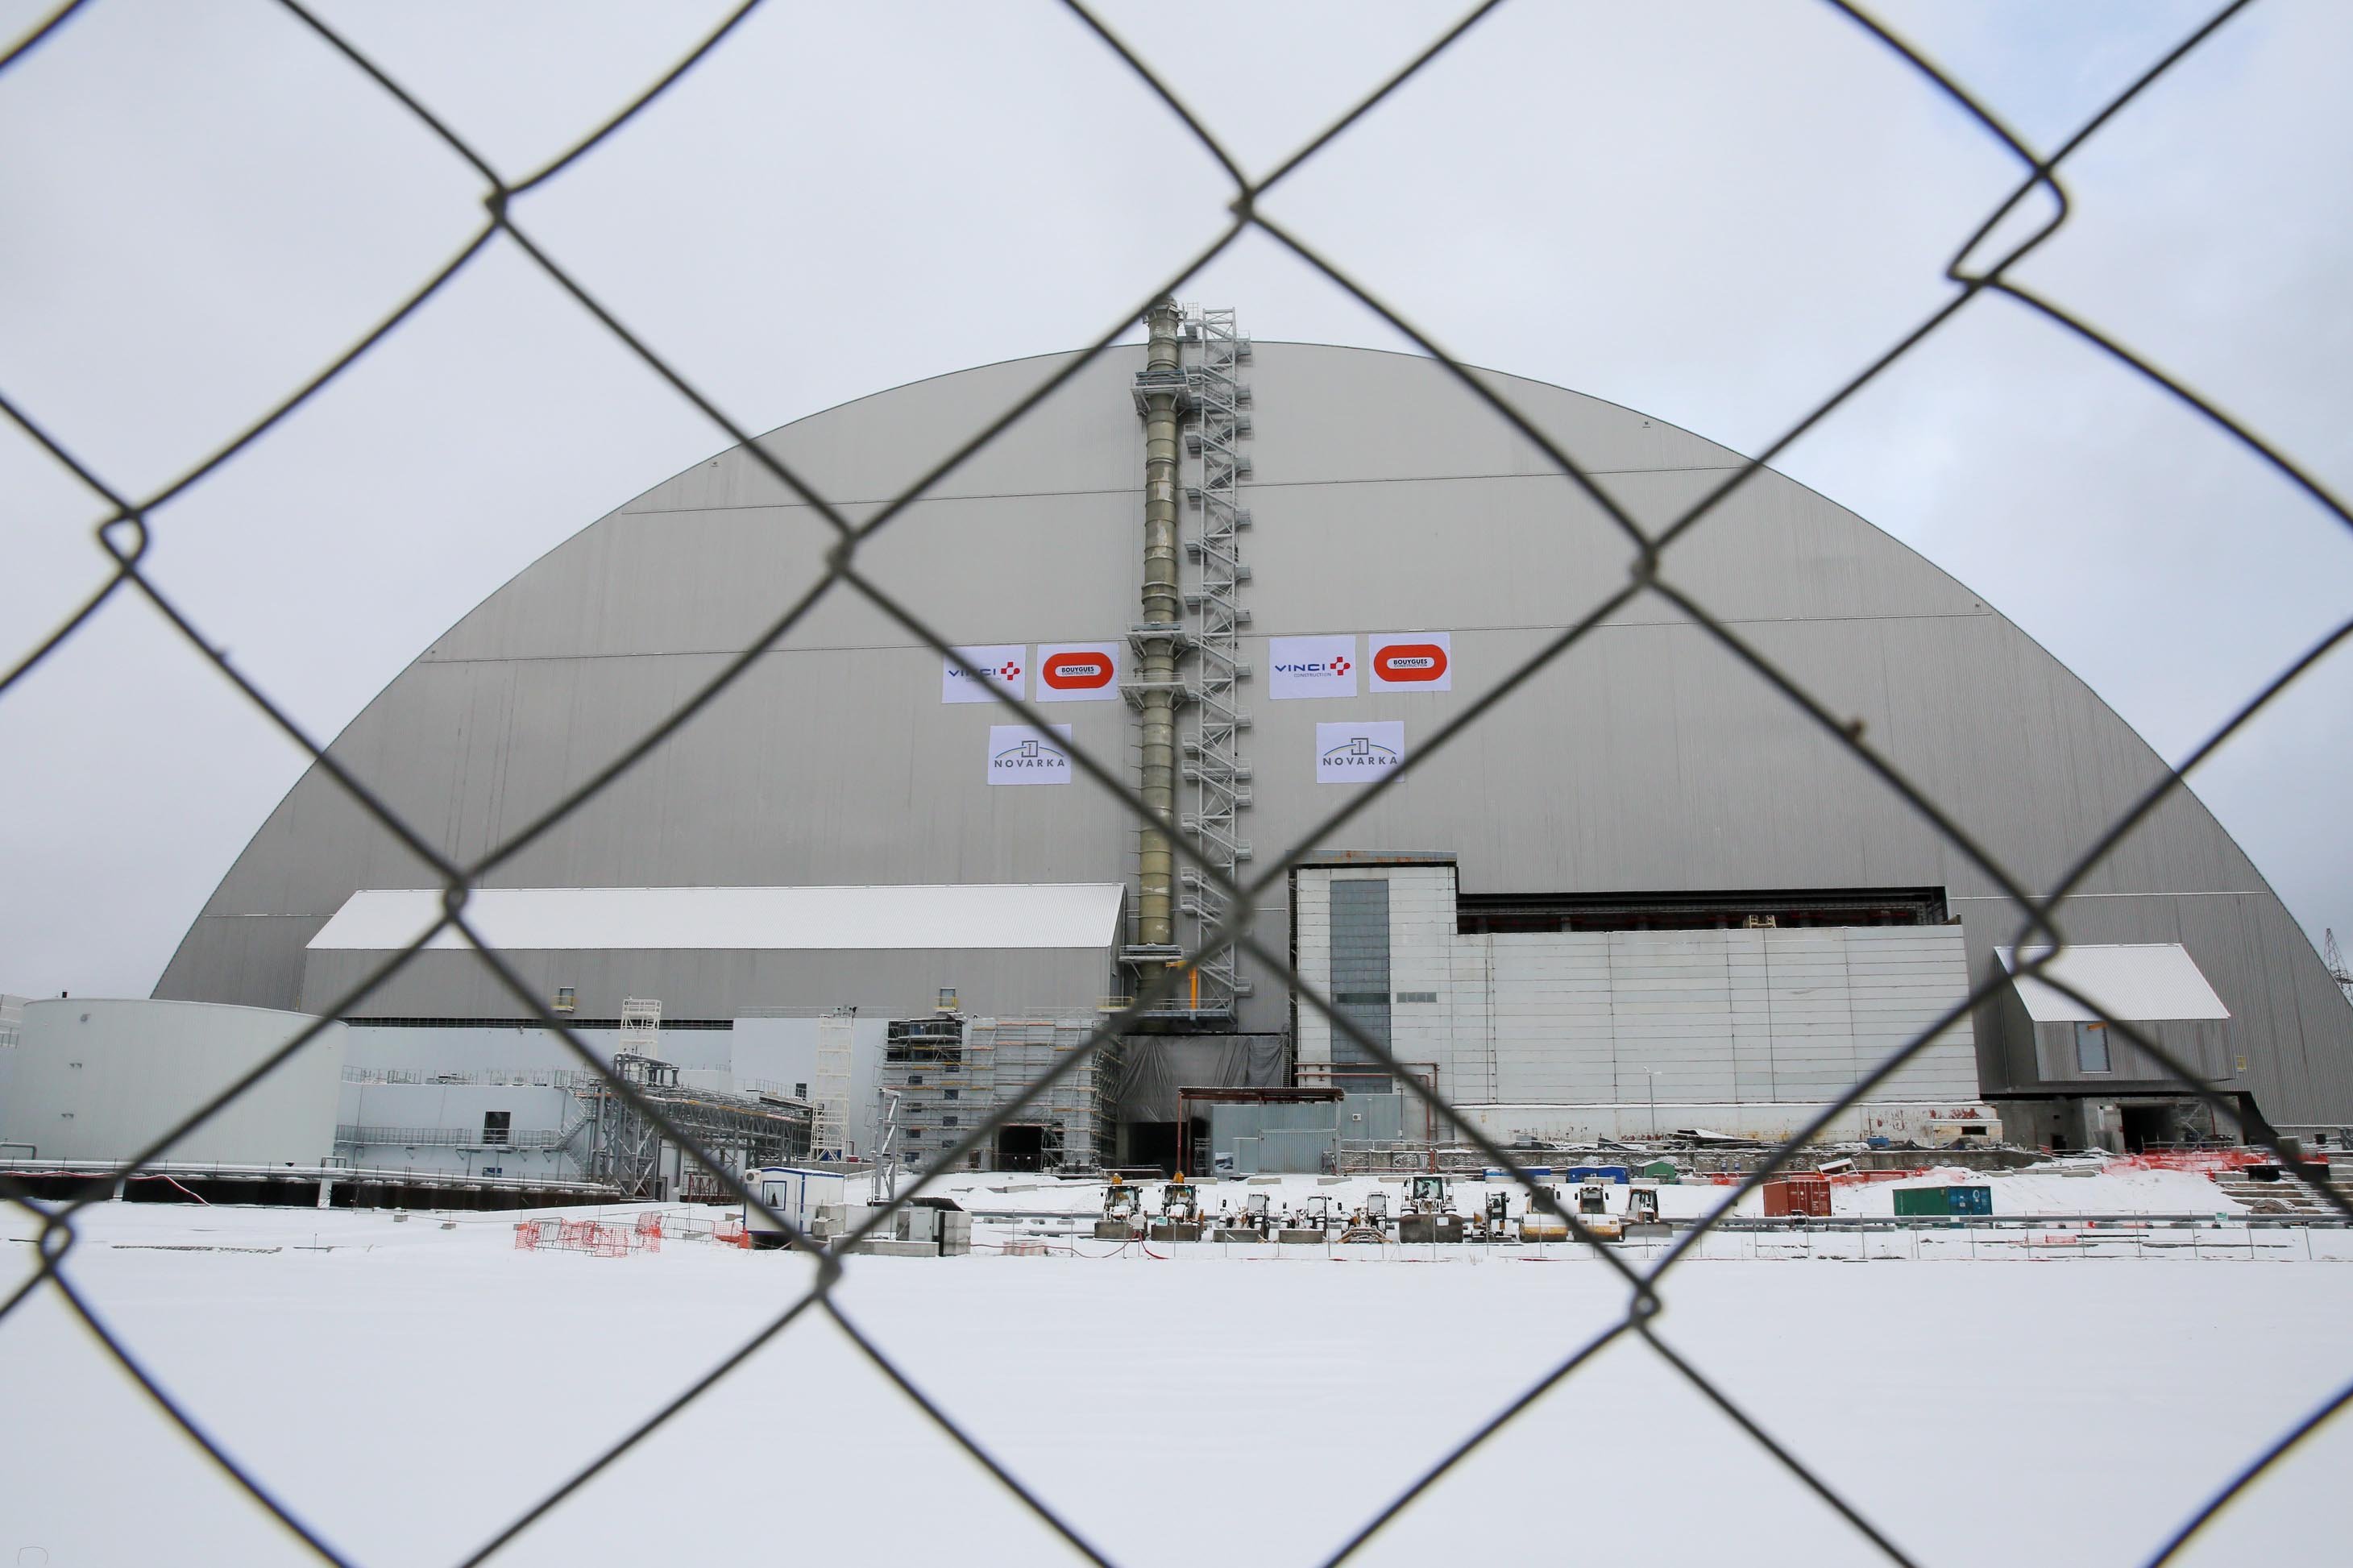 Chernobyl centrale nucleare